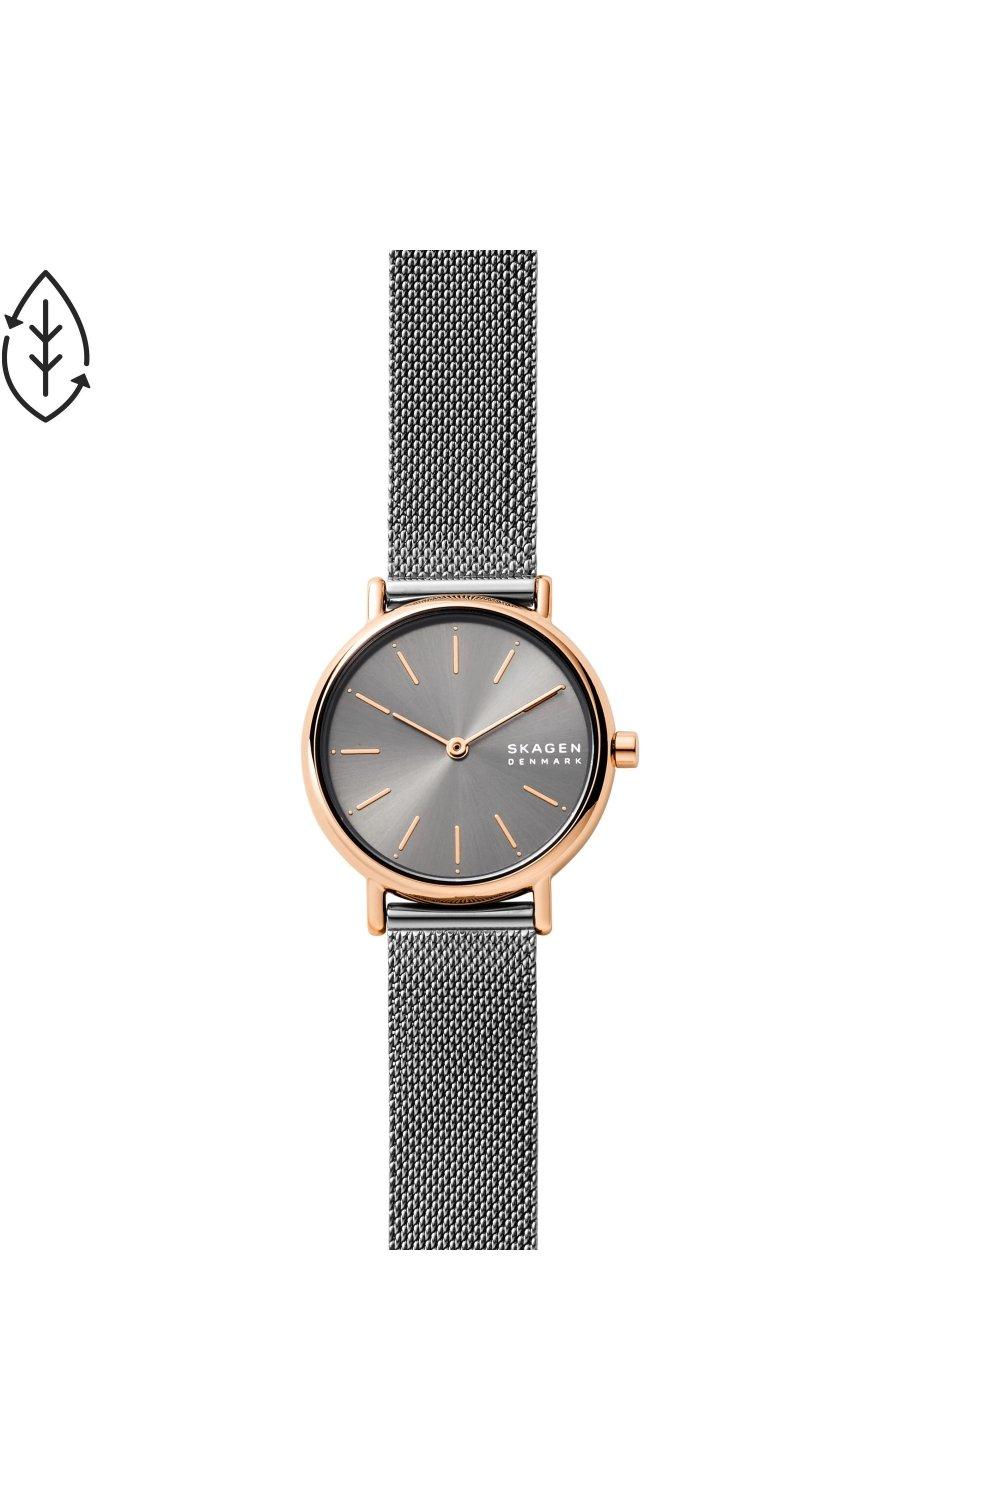 Watches | Signatur Stainless Steel Classic Analogue Quartz Watch